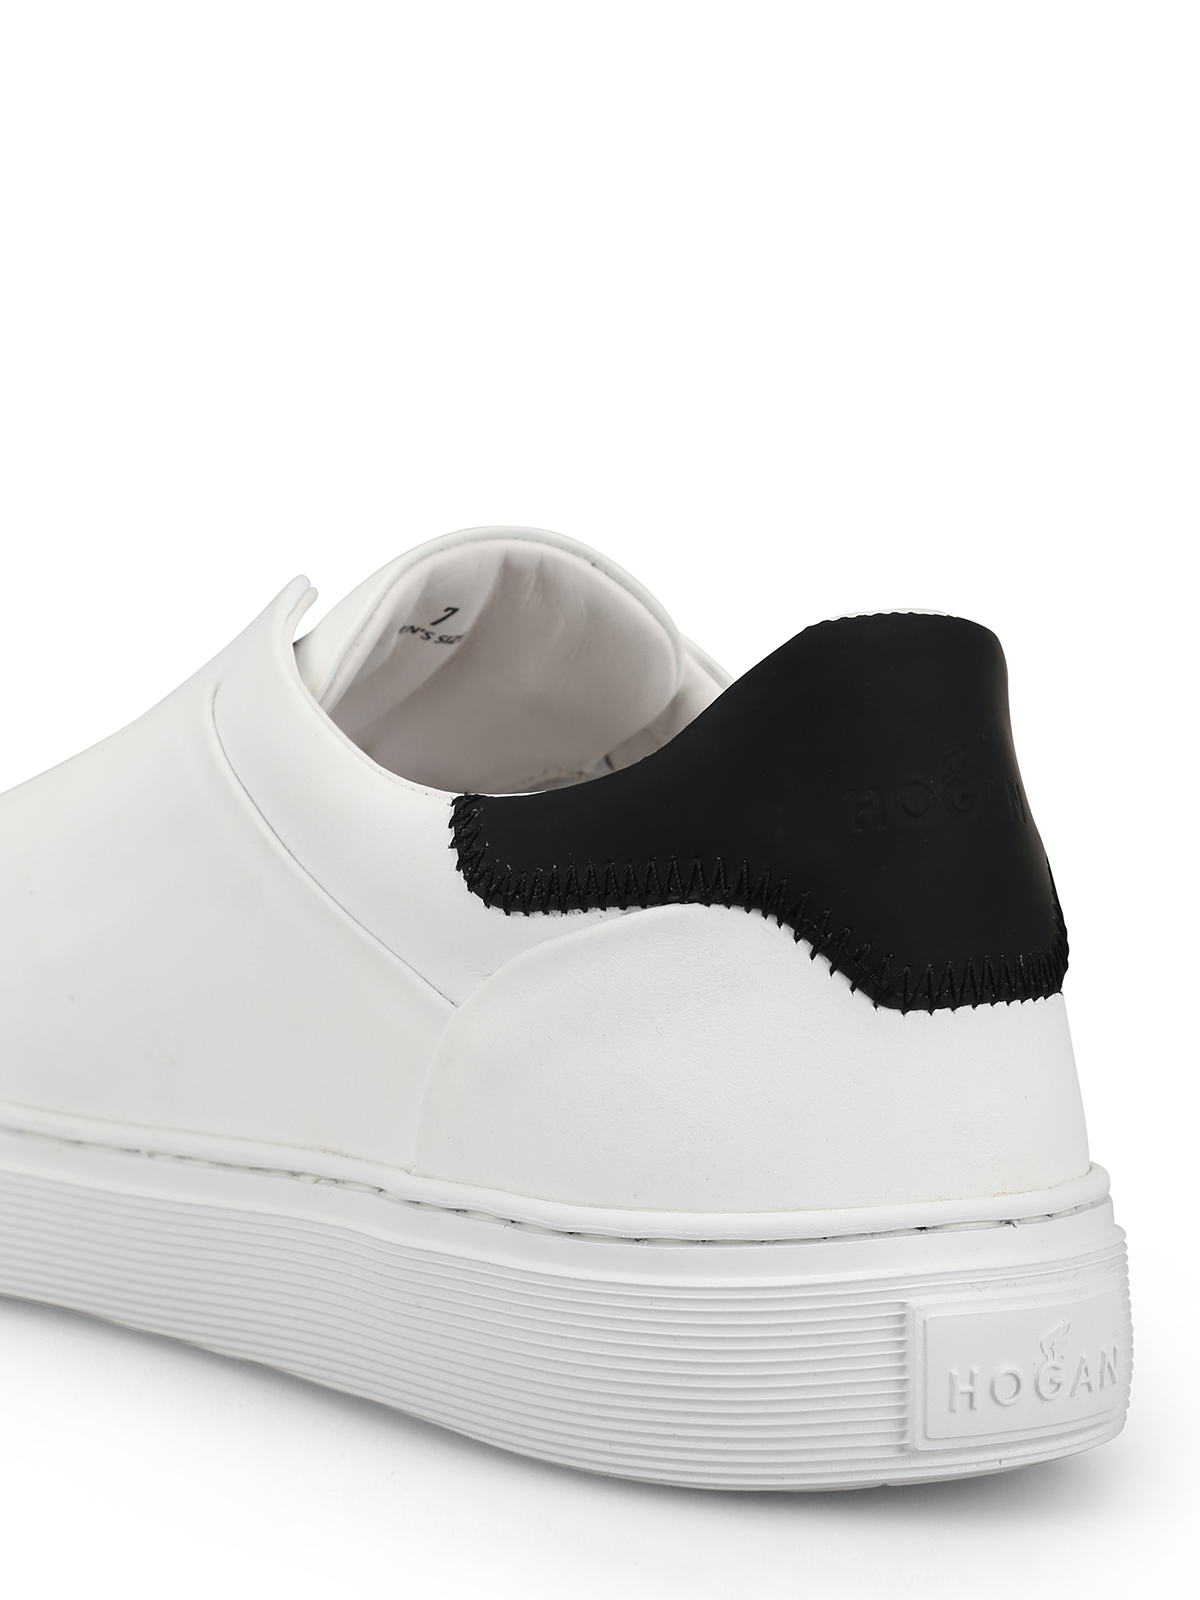 white leather slip on pumps